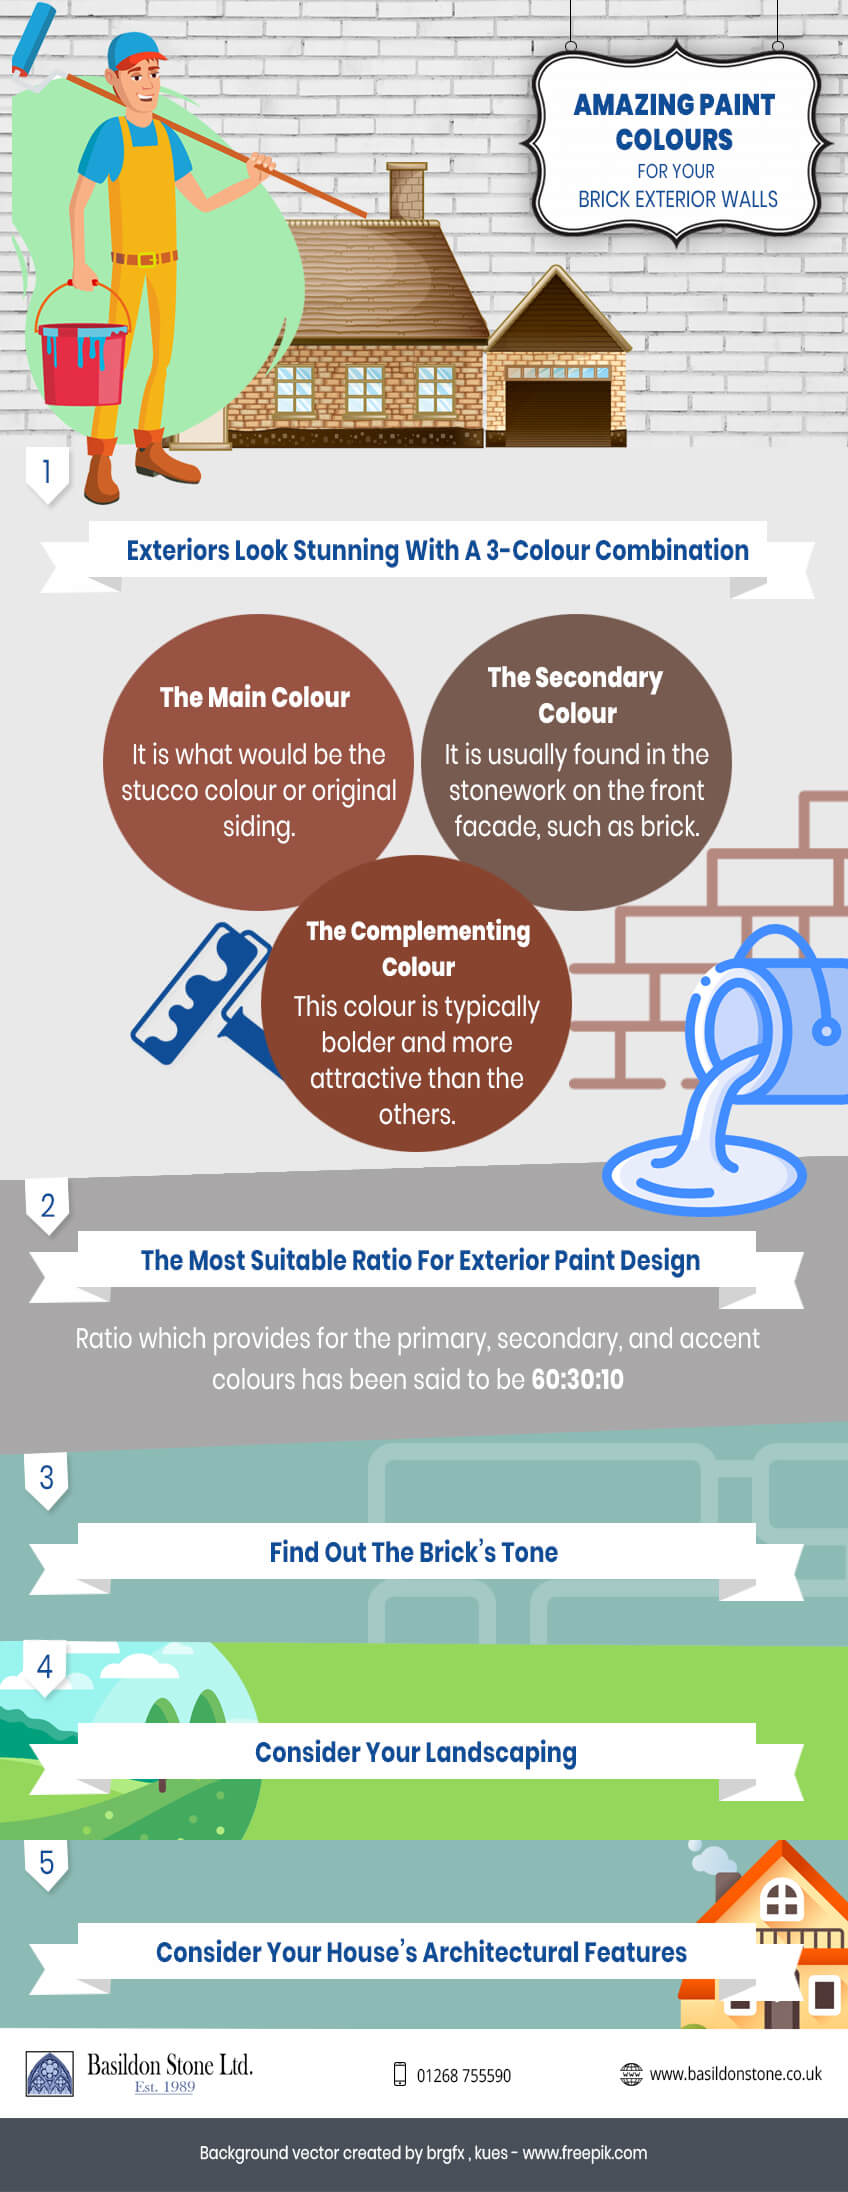 painting your brick exterior